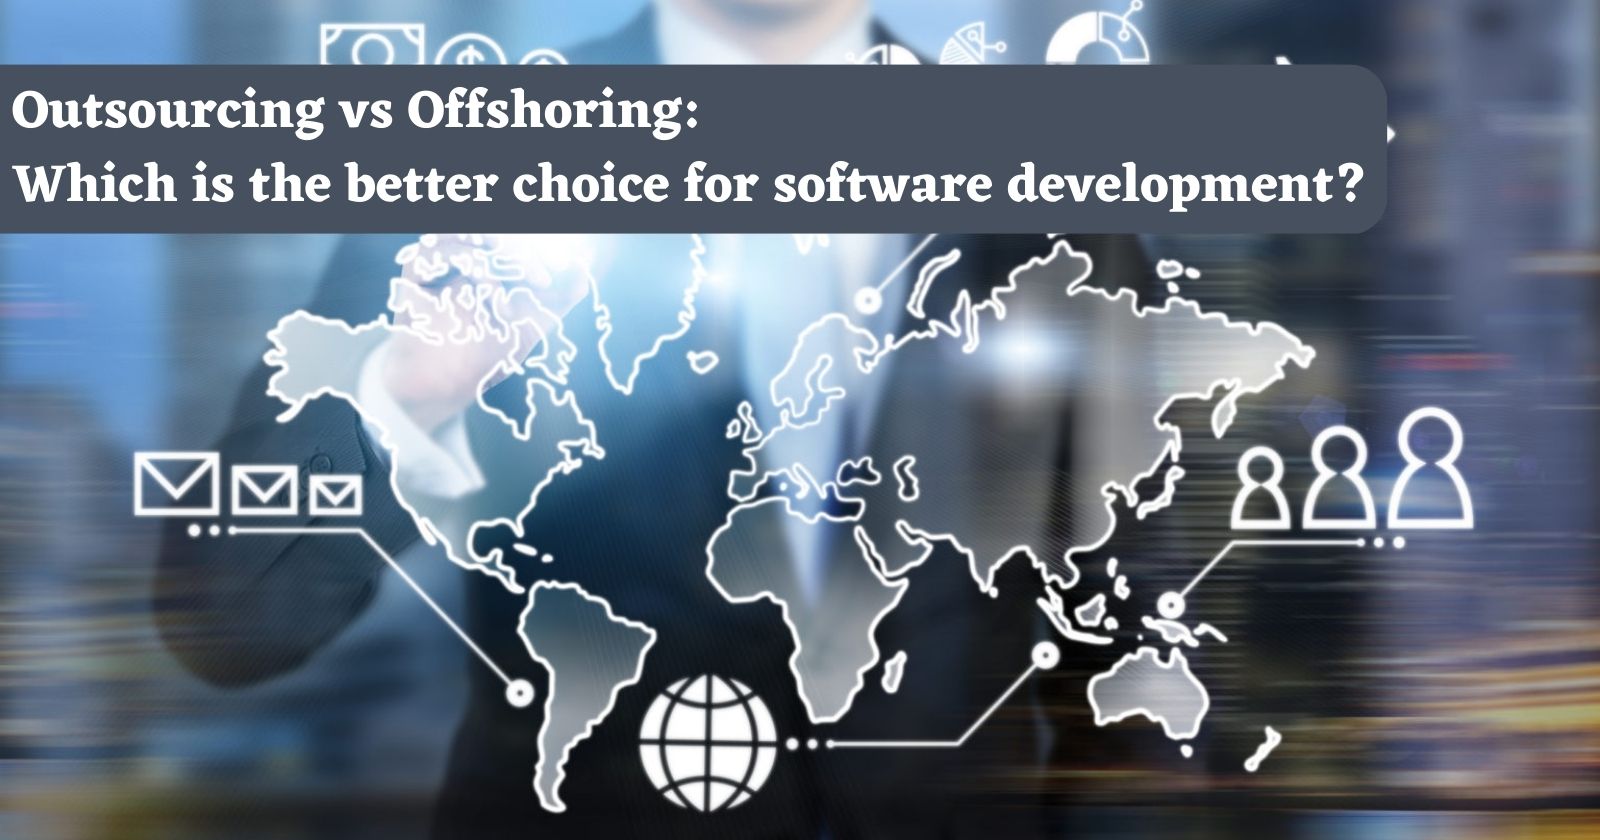 Outsourcing vs Offshoring: Which is the Better for Software Development?